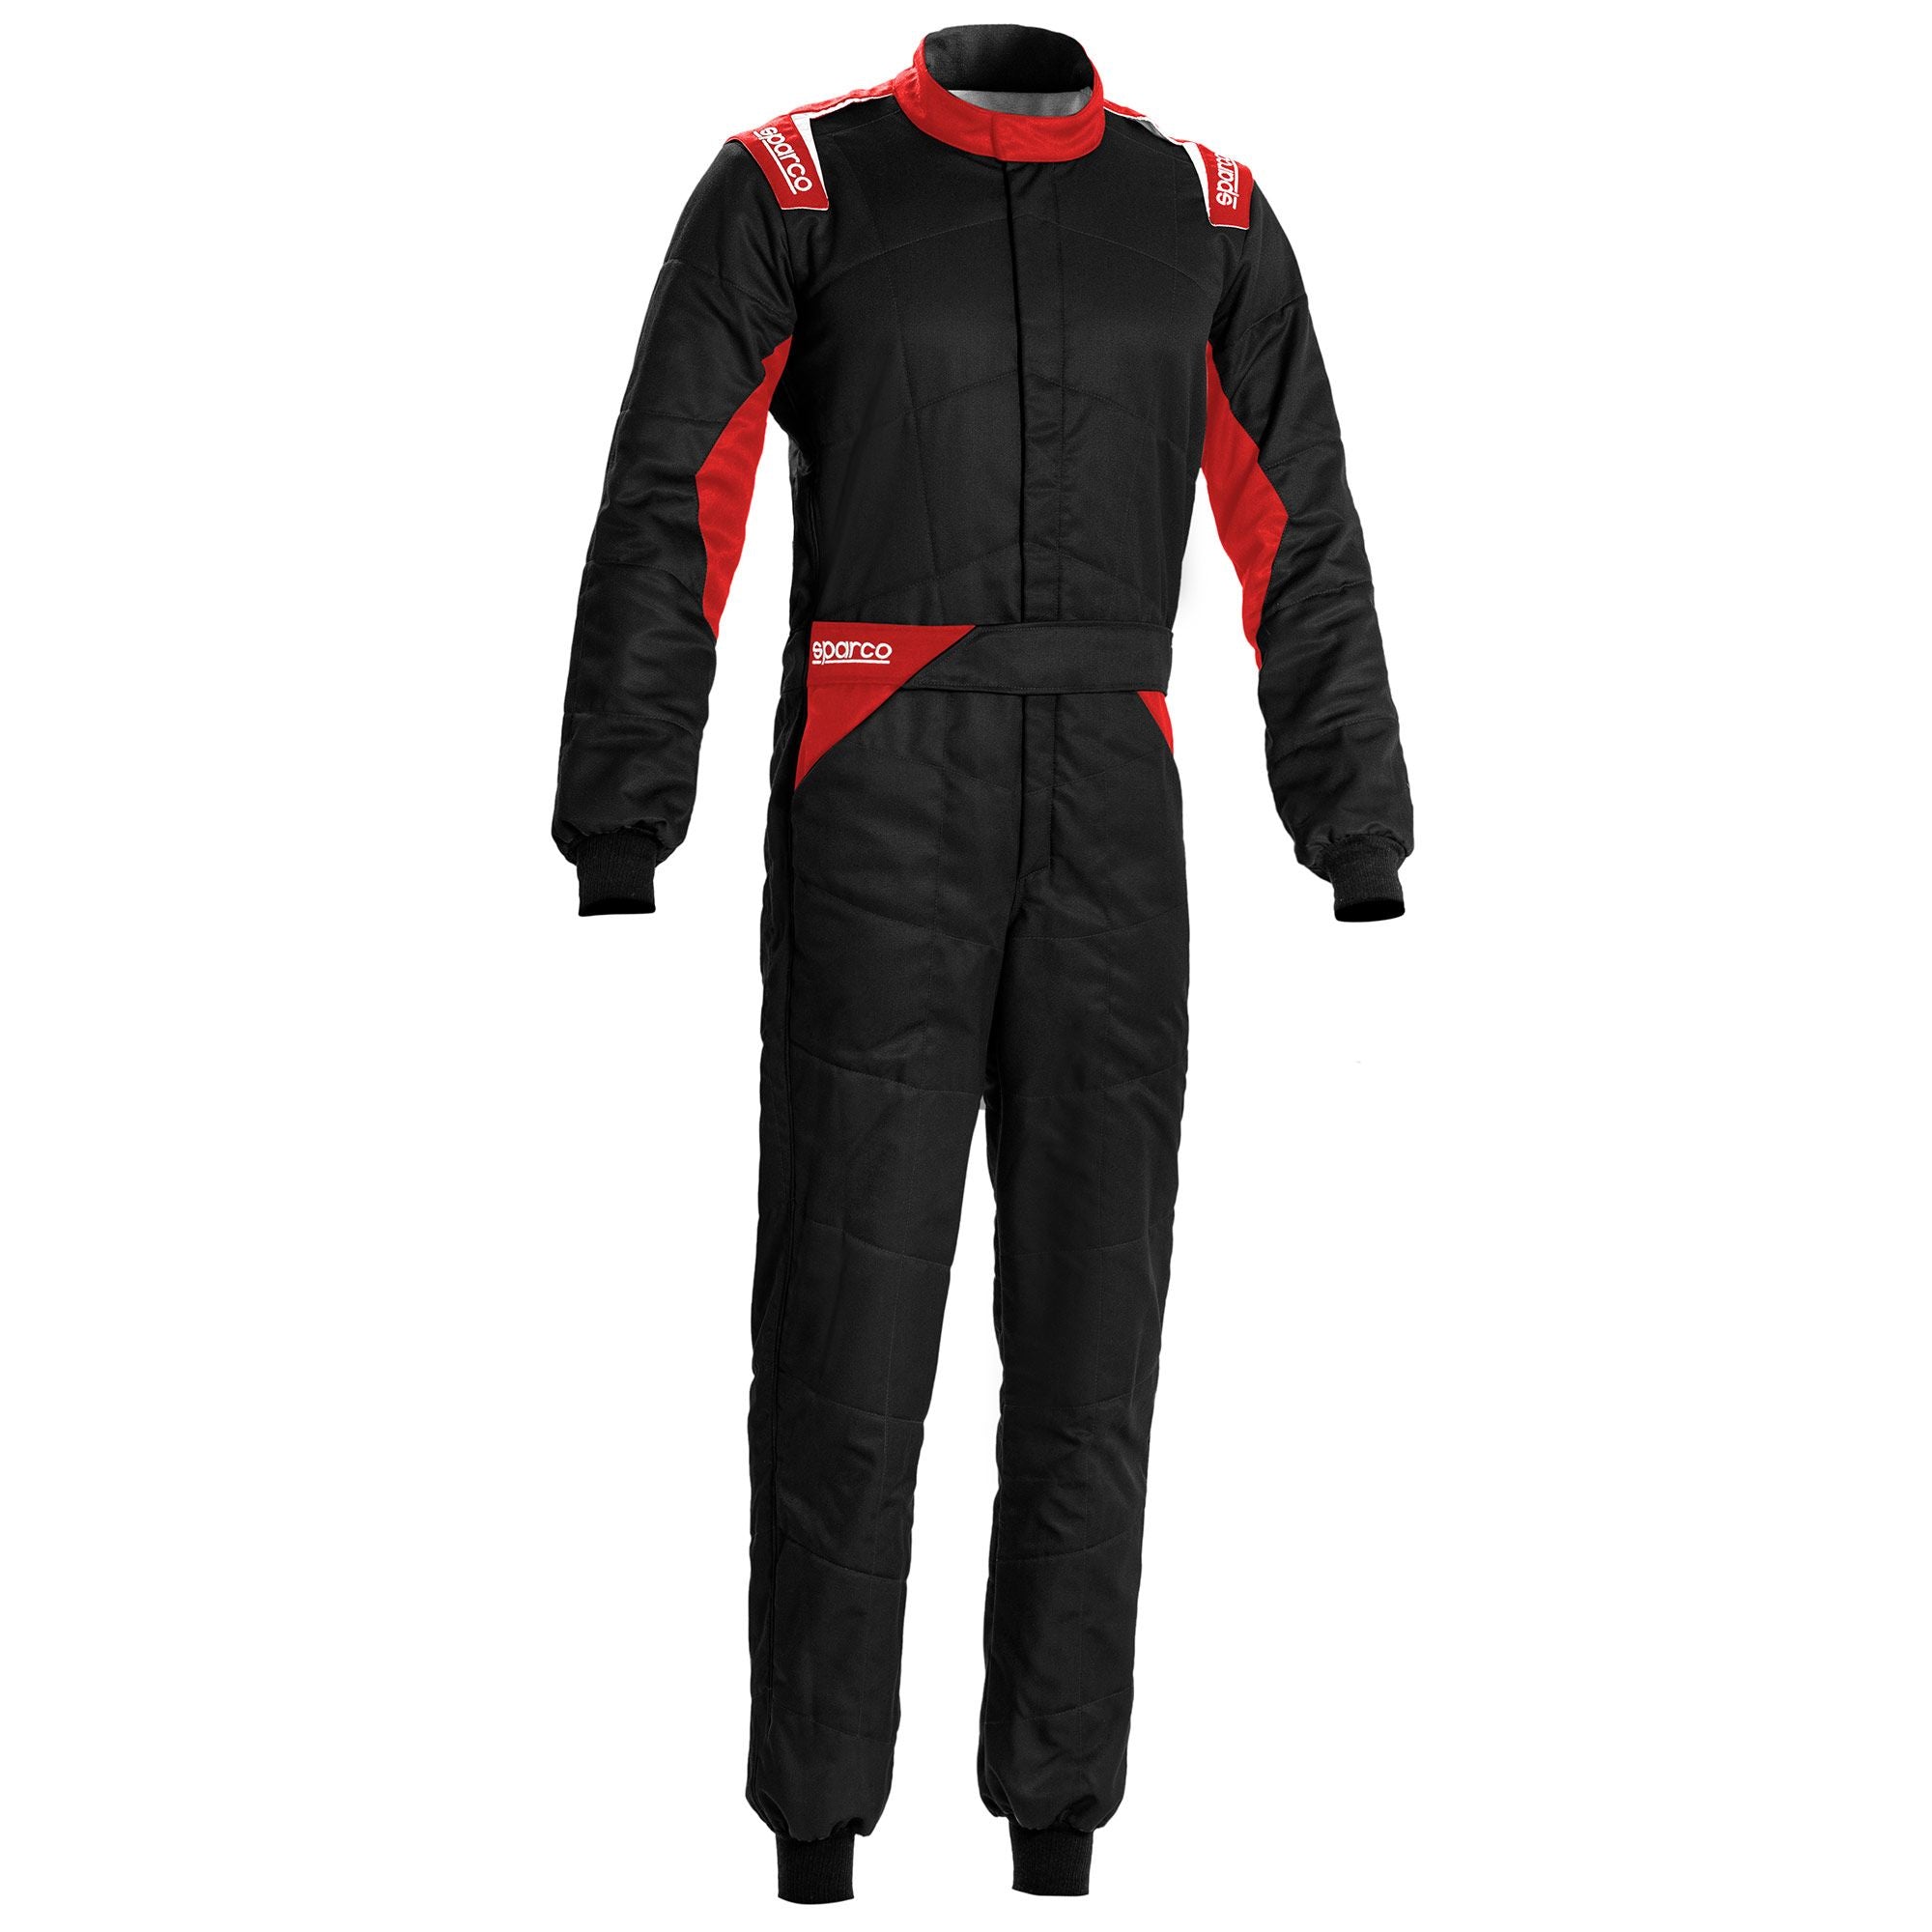 SPARCO 00109364NRRS SPRINT 2022 Racing suit, FIA 8856-2018, black/red, size 64 Photo-0 